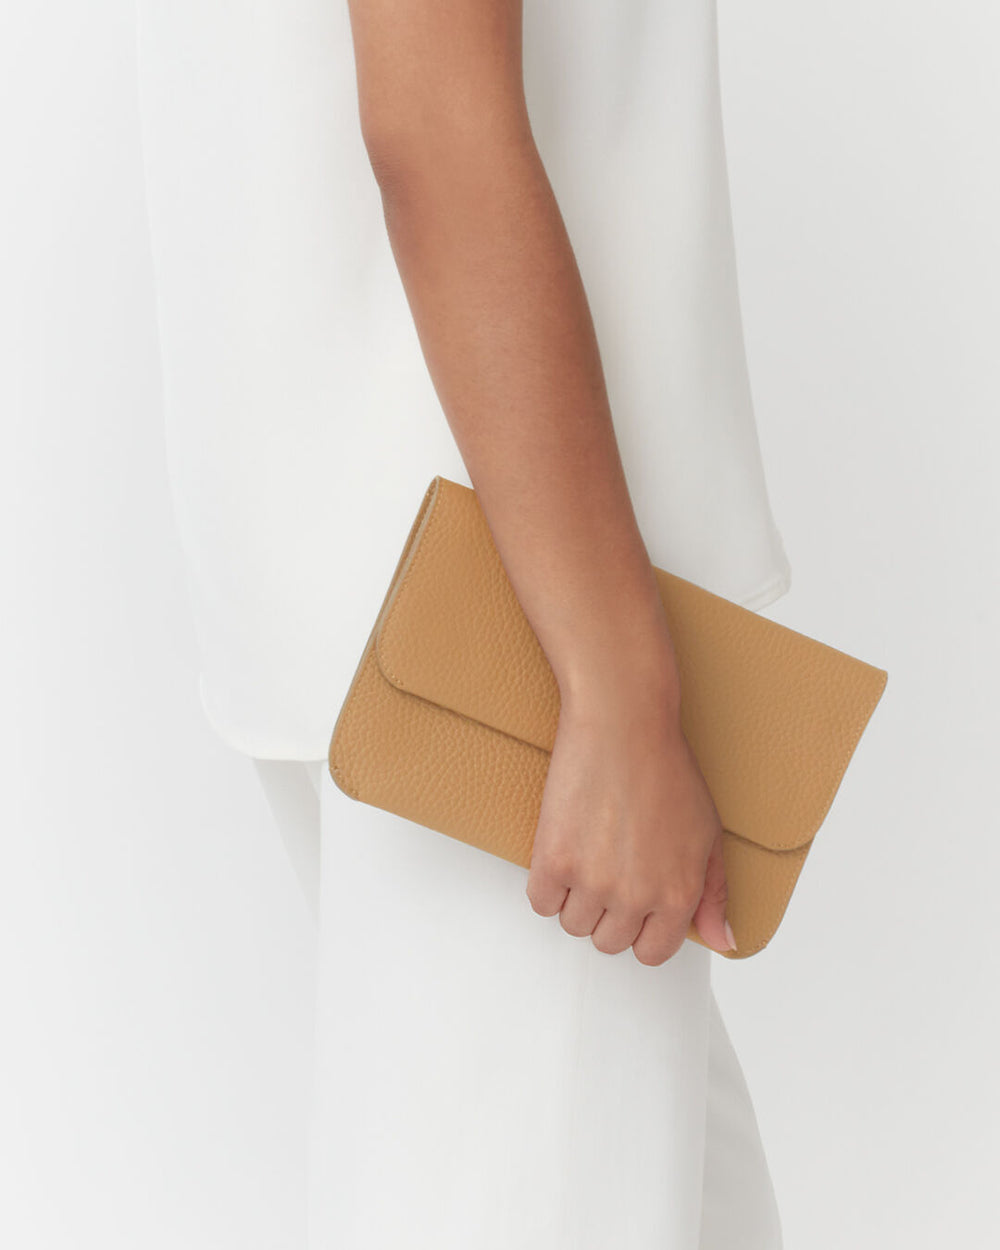 Person holding a clutch bag against their side